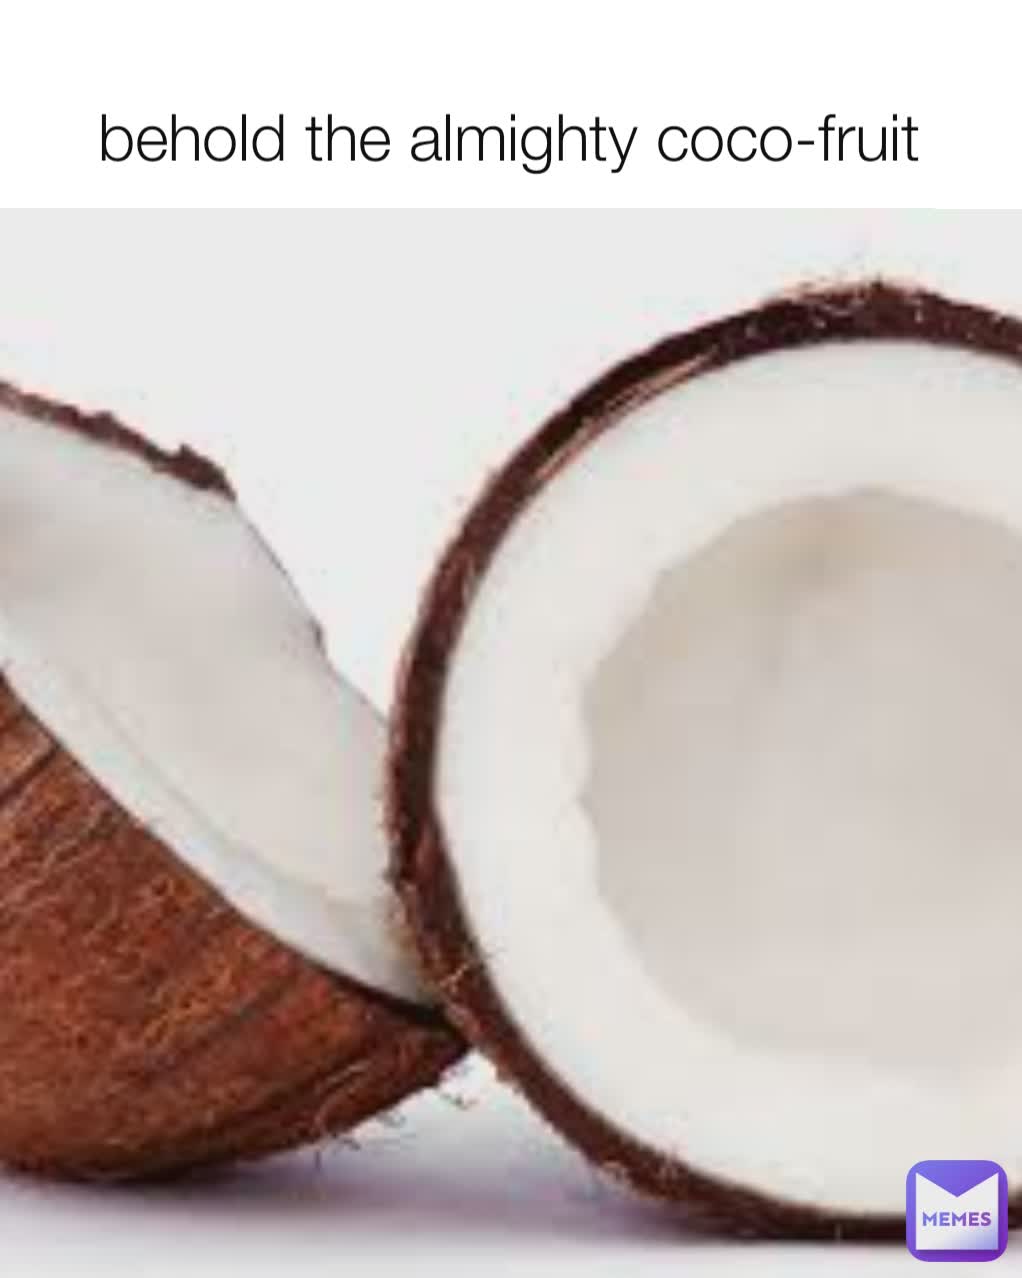 behold the almighty coco-fruit